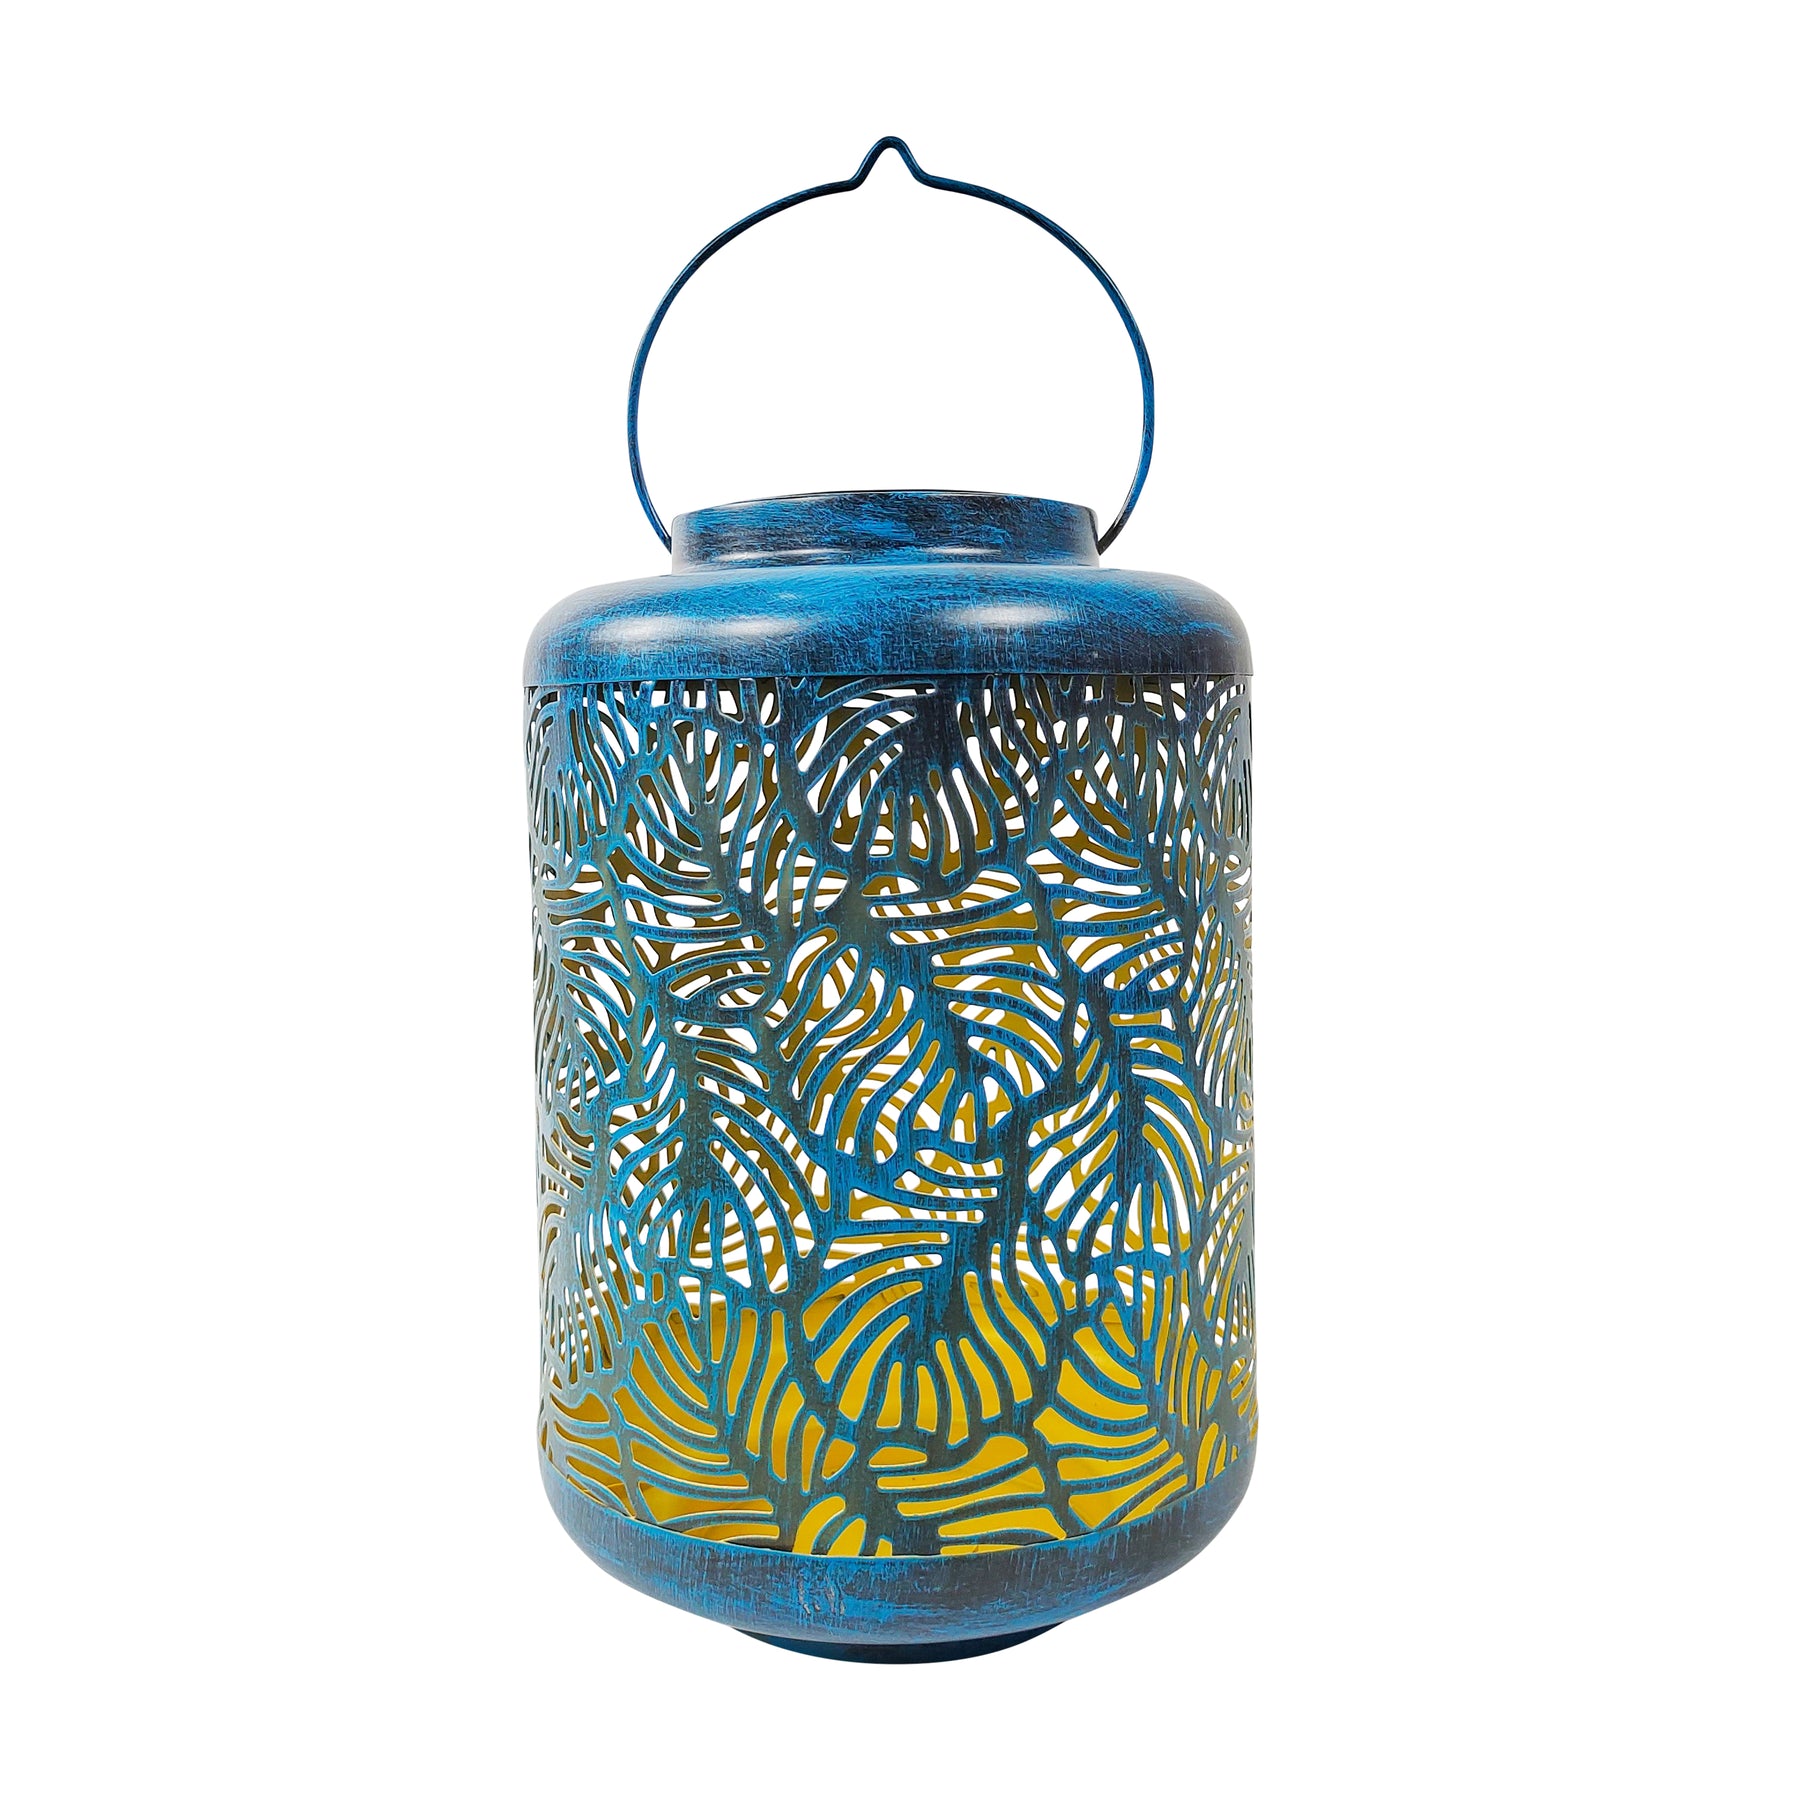 Bliss Outdoors 12-inch Tall Hanging and Tabletop Decorative Solar LED Lantern with Unique Tropical Leaf Design and Antique Hand Painted Finish in the brushed blue variation.